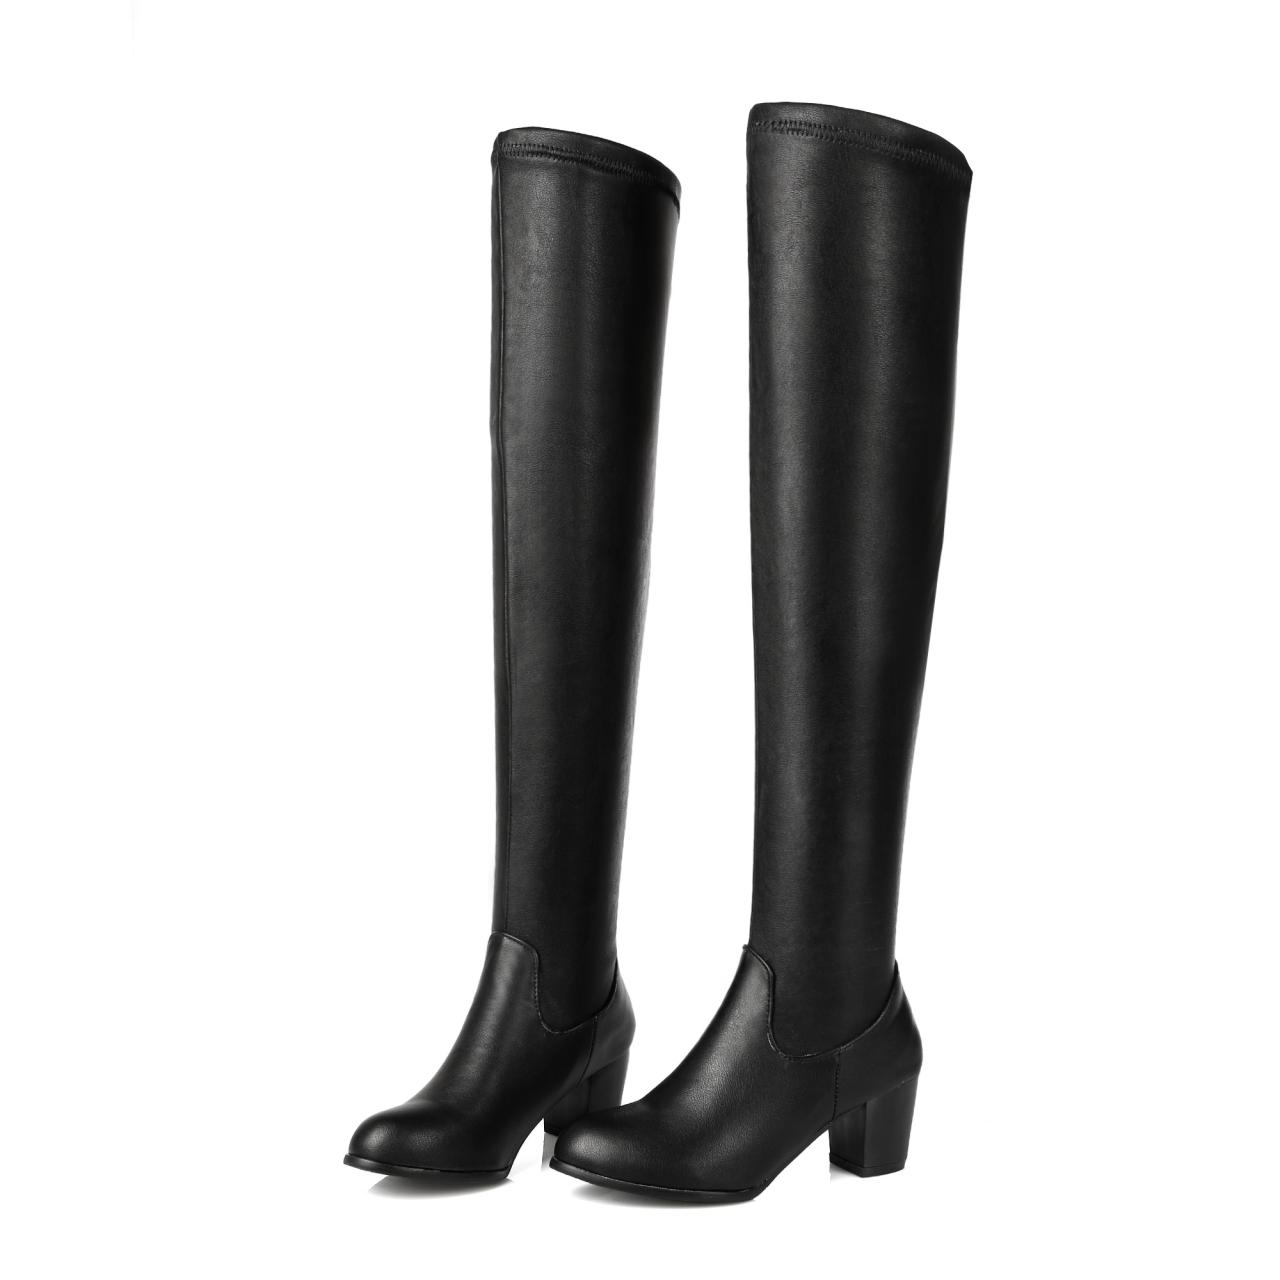 Thick With Med Heel Round Toe Slip On Over The Knee Pu Leather Riding Autumn Winter Boots For Women